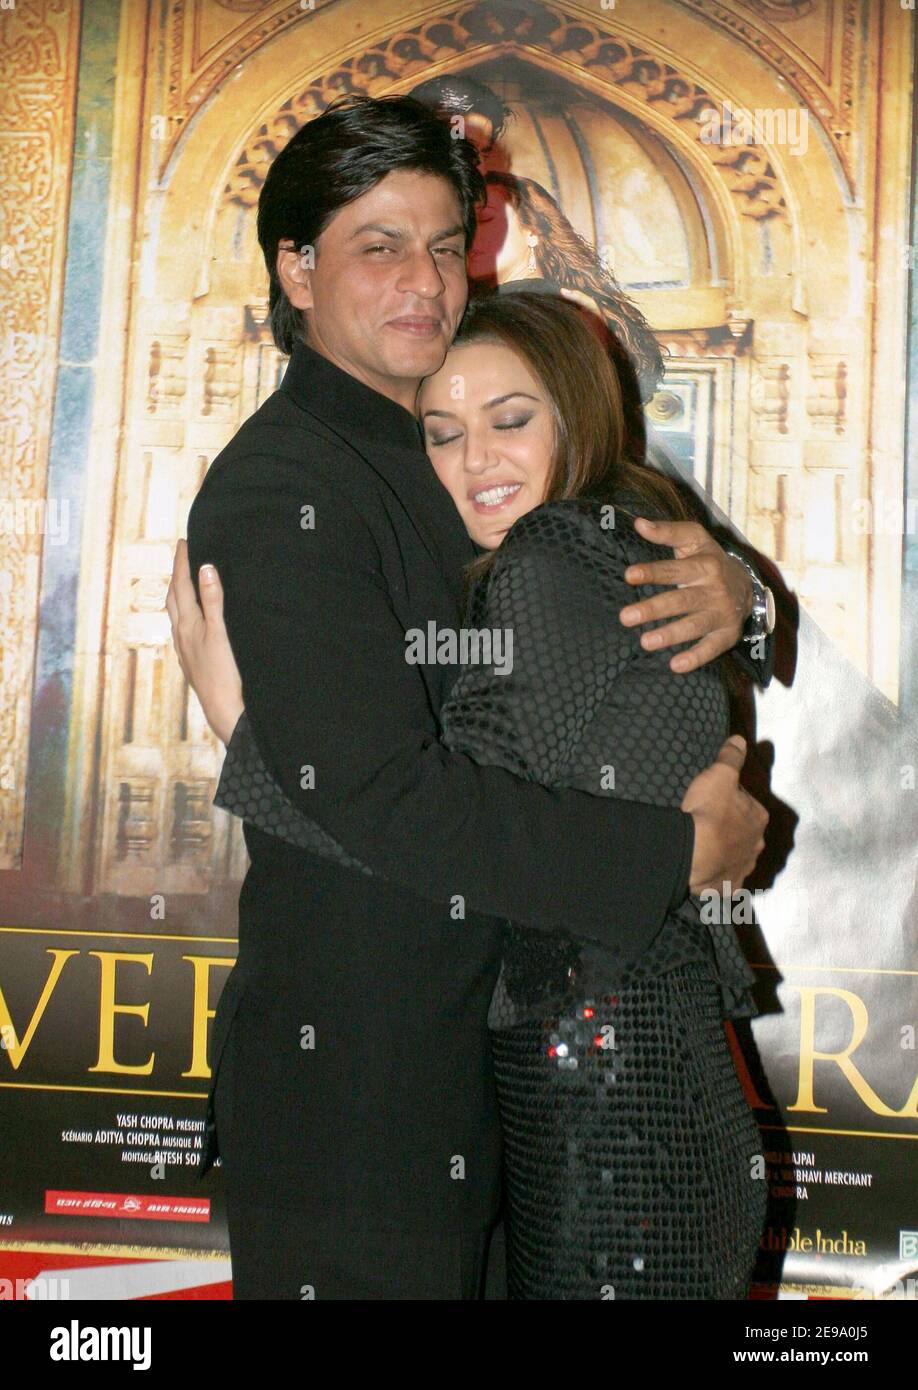 Bollywood star Shah Rukh Khan and Indian actress Rani Mukerji attend the premiere of their movie Veer-Zaara held at the Rex Movie Theatre in Paris, France on April 26, 2006 as part of the Bollywood Week, in Paris. Photo by Benoit Pinguet/ABACAPRESS.COM Stock Photo